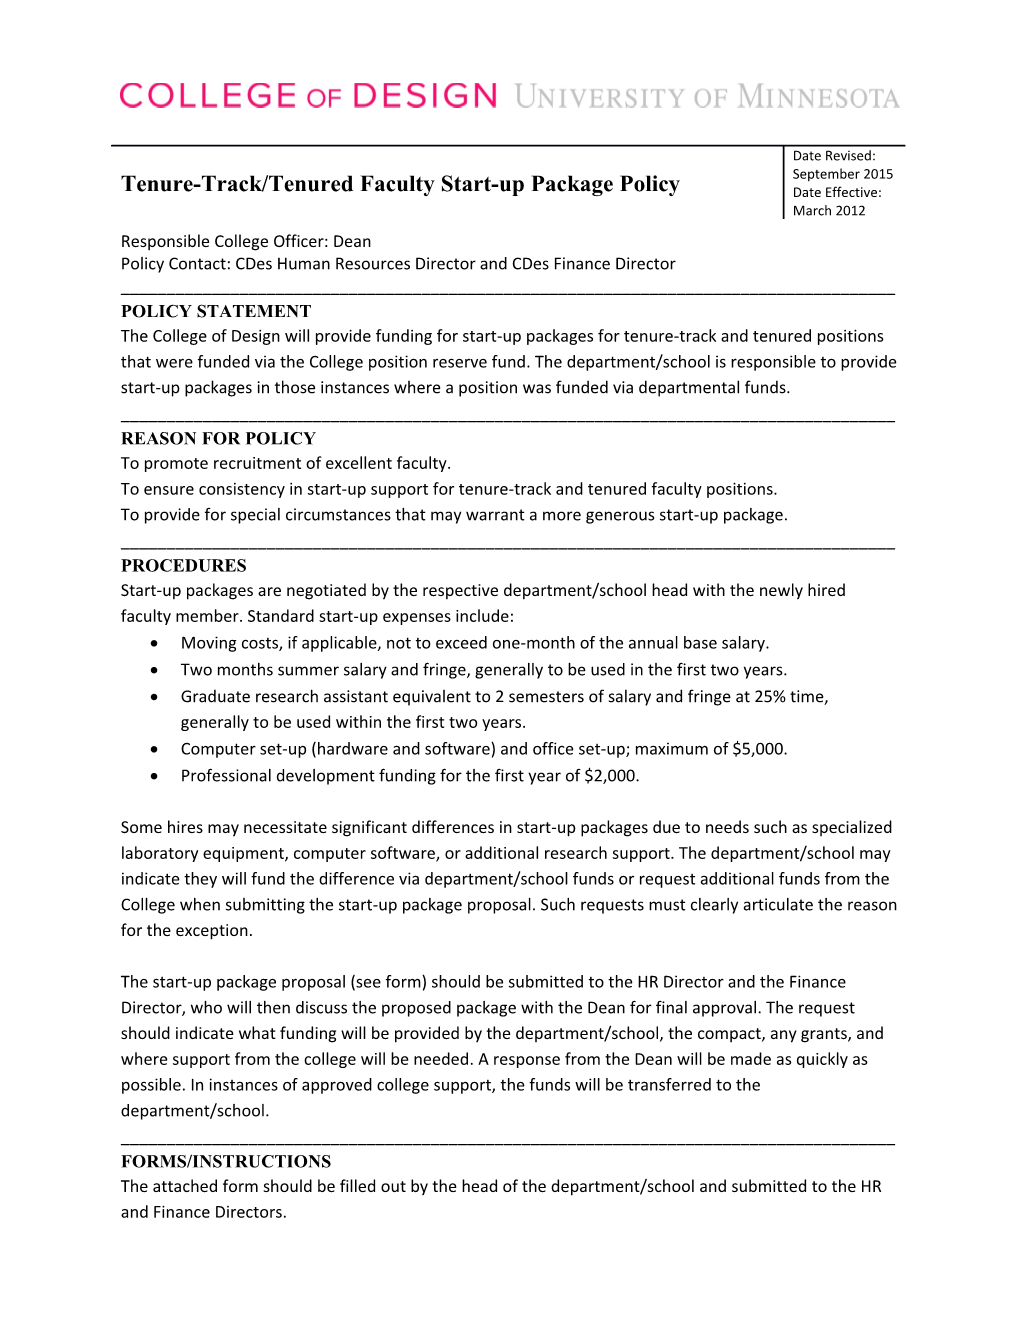 College of Design Faculty Start-Up Package Policy Page 2